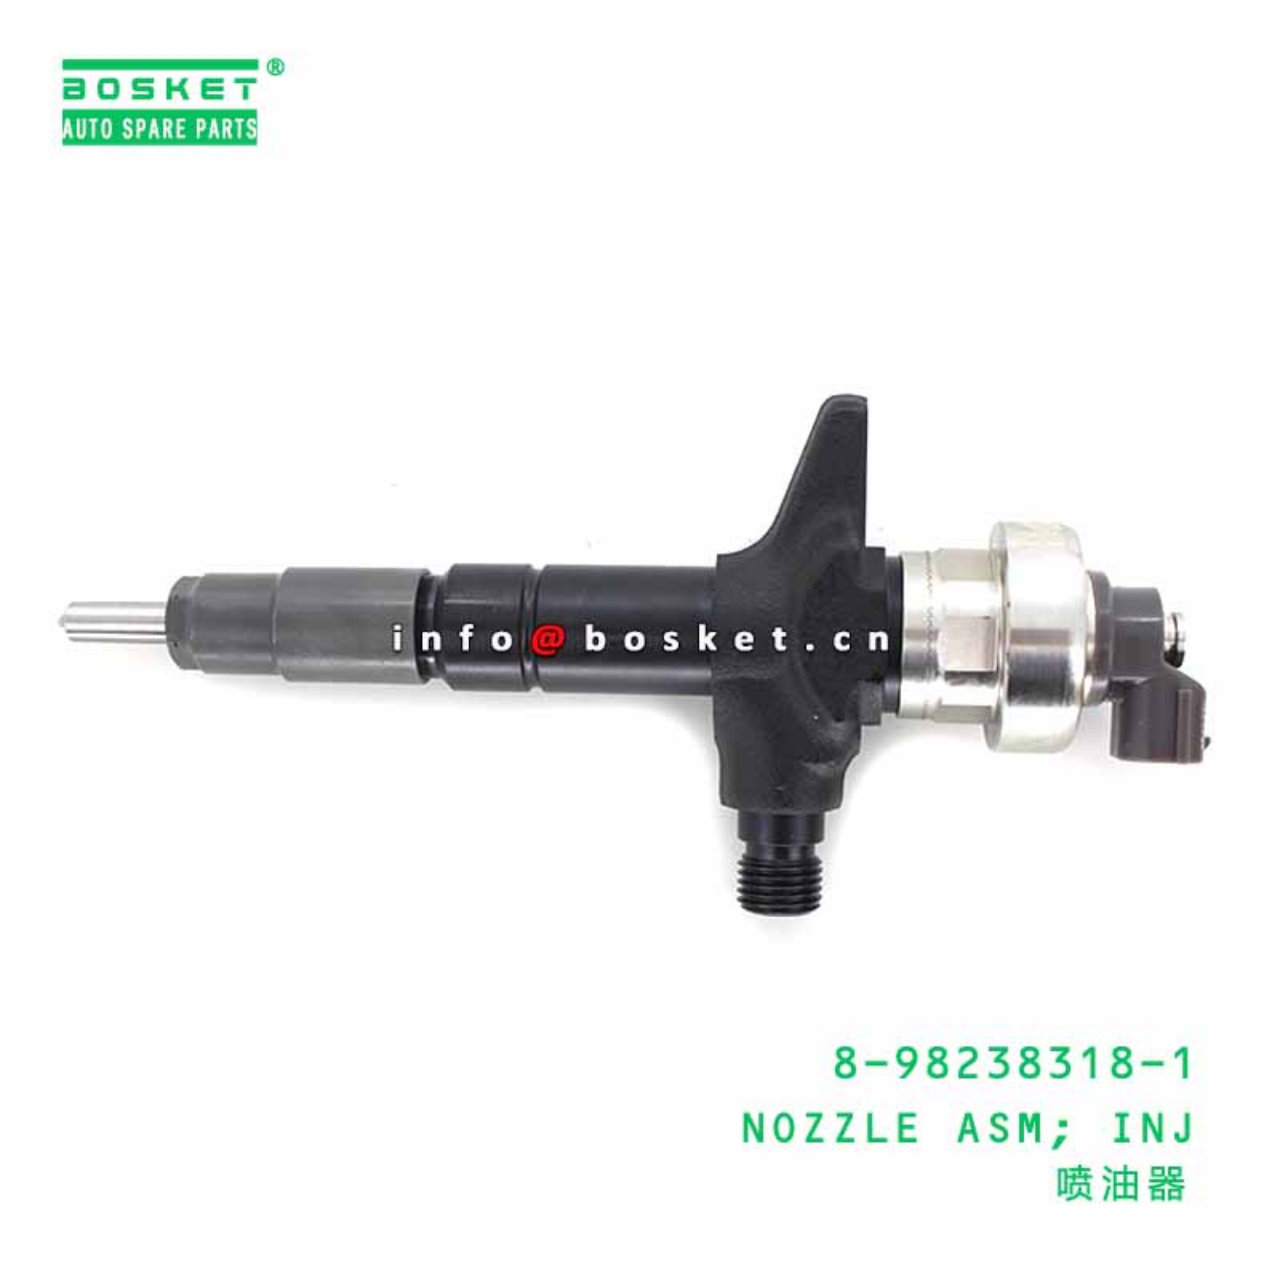 8-98238318-1 8982383181 INJECTION NOZZLE ASSEMBLY Suitable For ISUZU NLR85 4JJ1